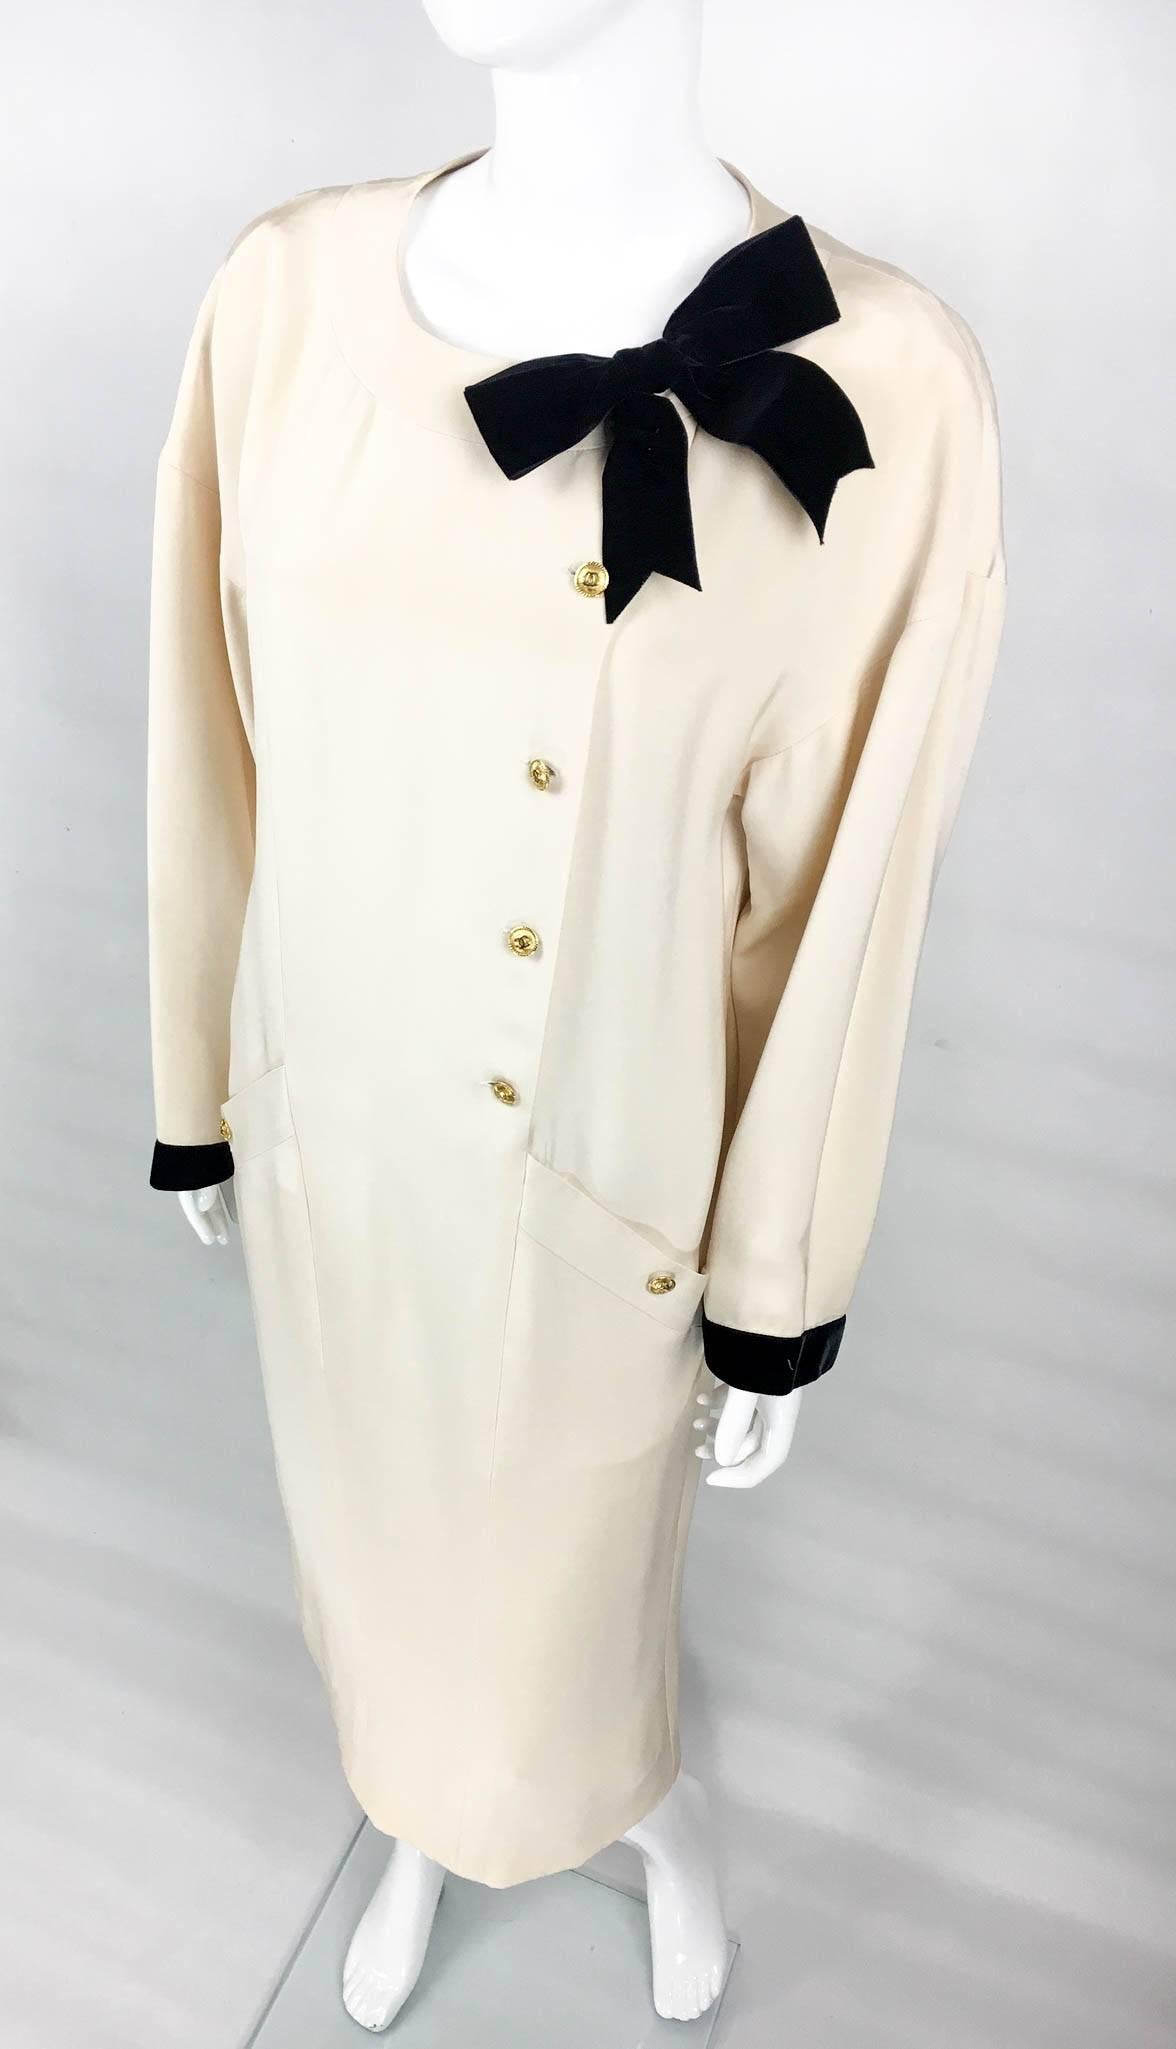 Women's Chanel Champagne Silk Dress With Black Velvet Cuffs and Bow - 1980s For Sale